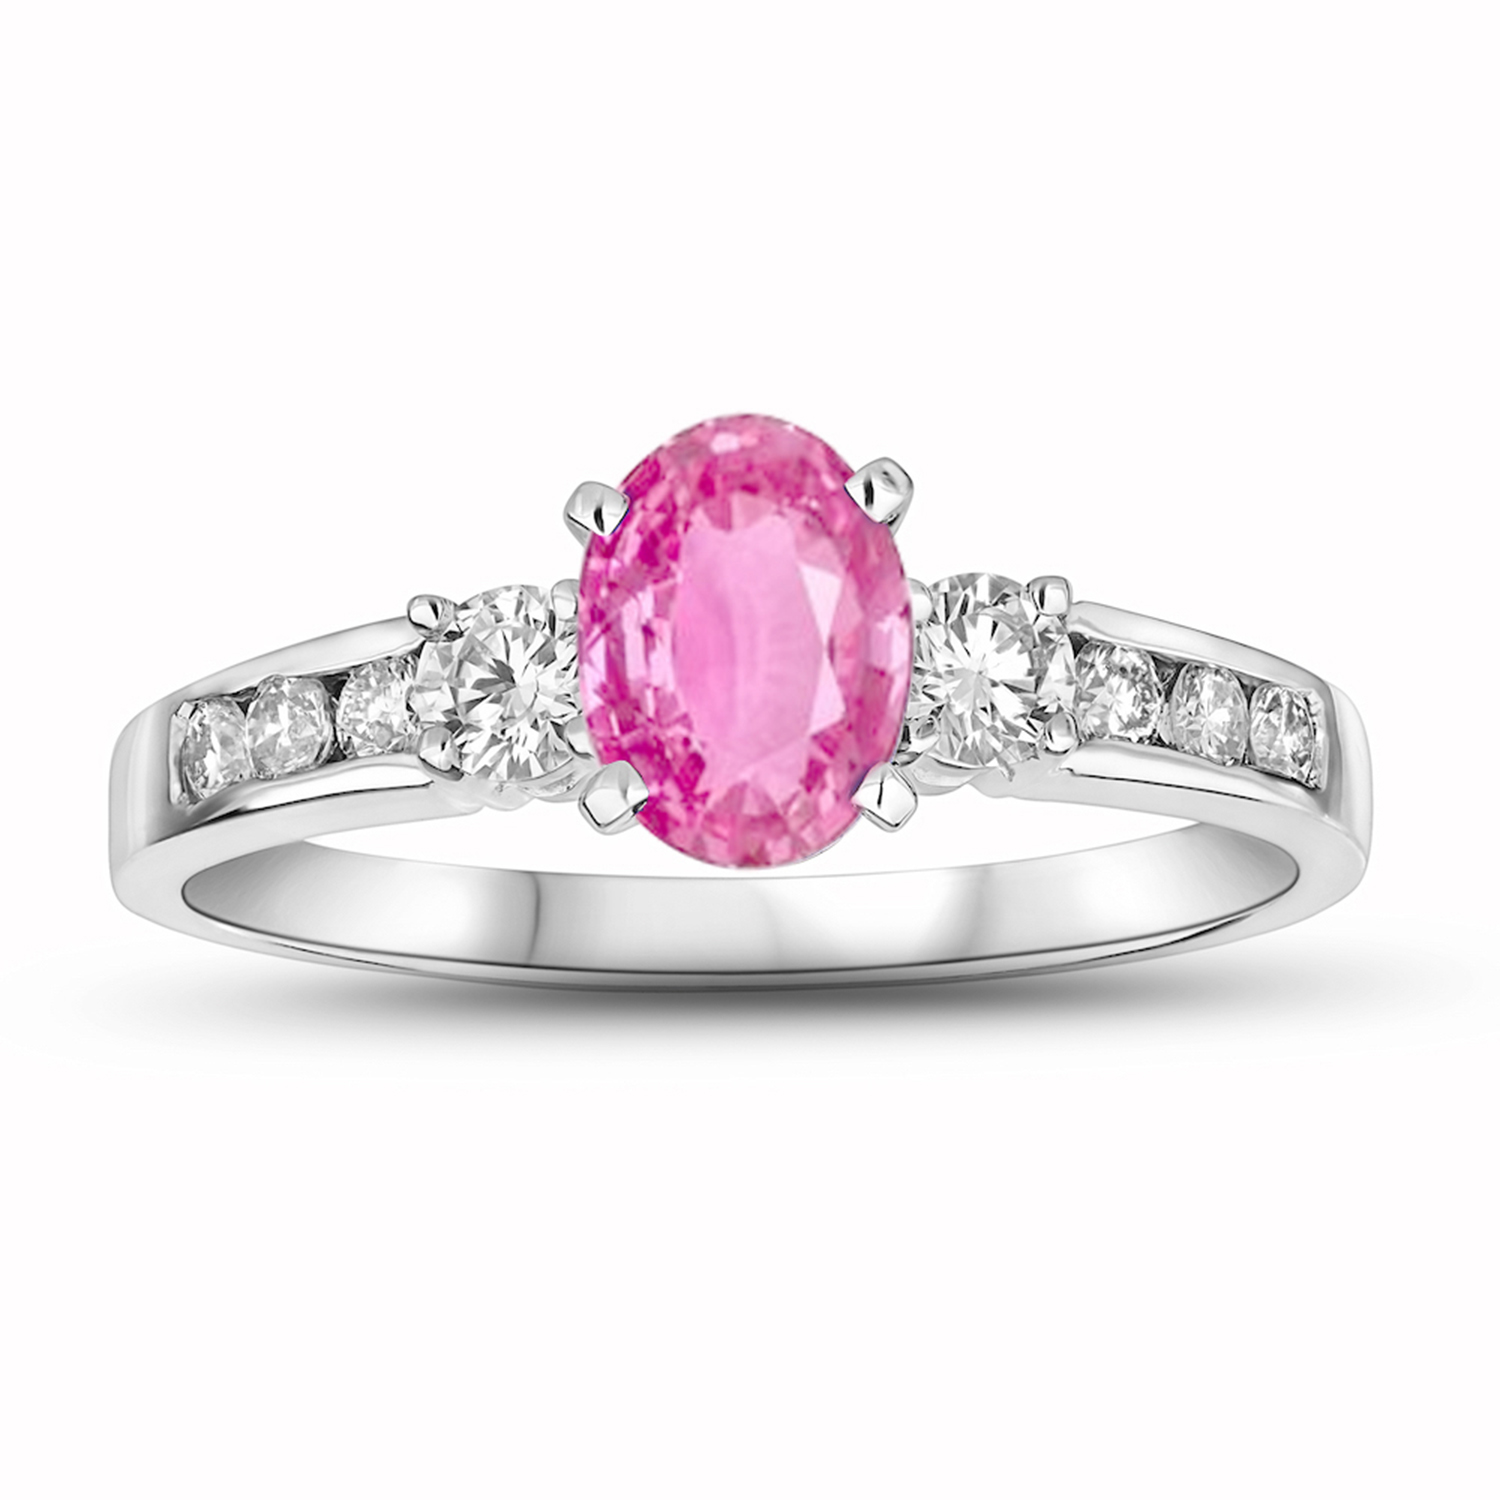 View 0.40ctw DIamond and Pink Sapphire Engagement Ring in 14k Gold